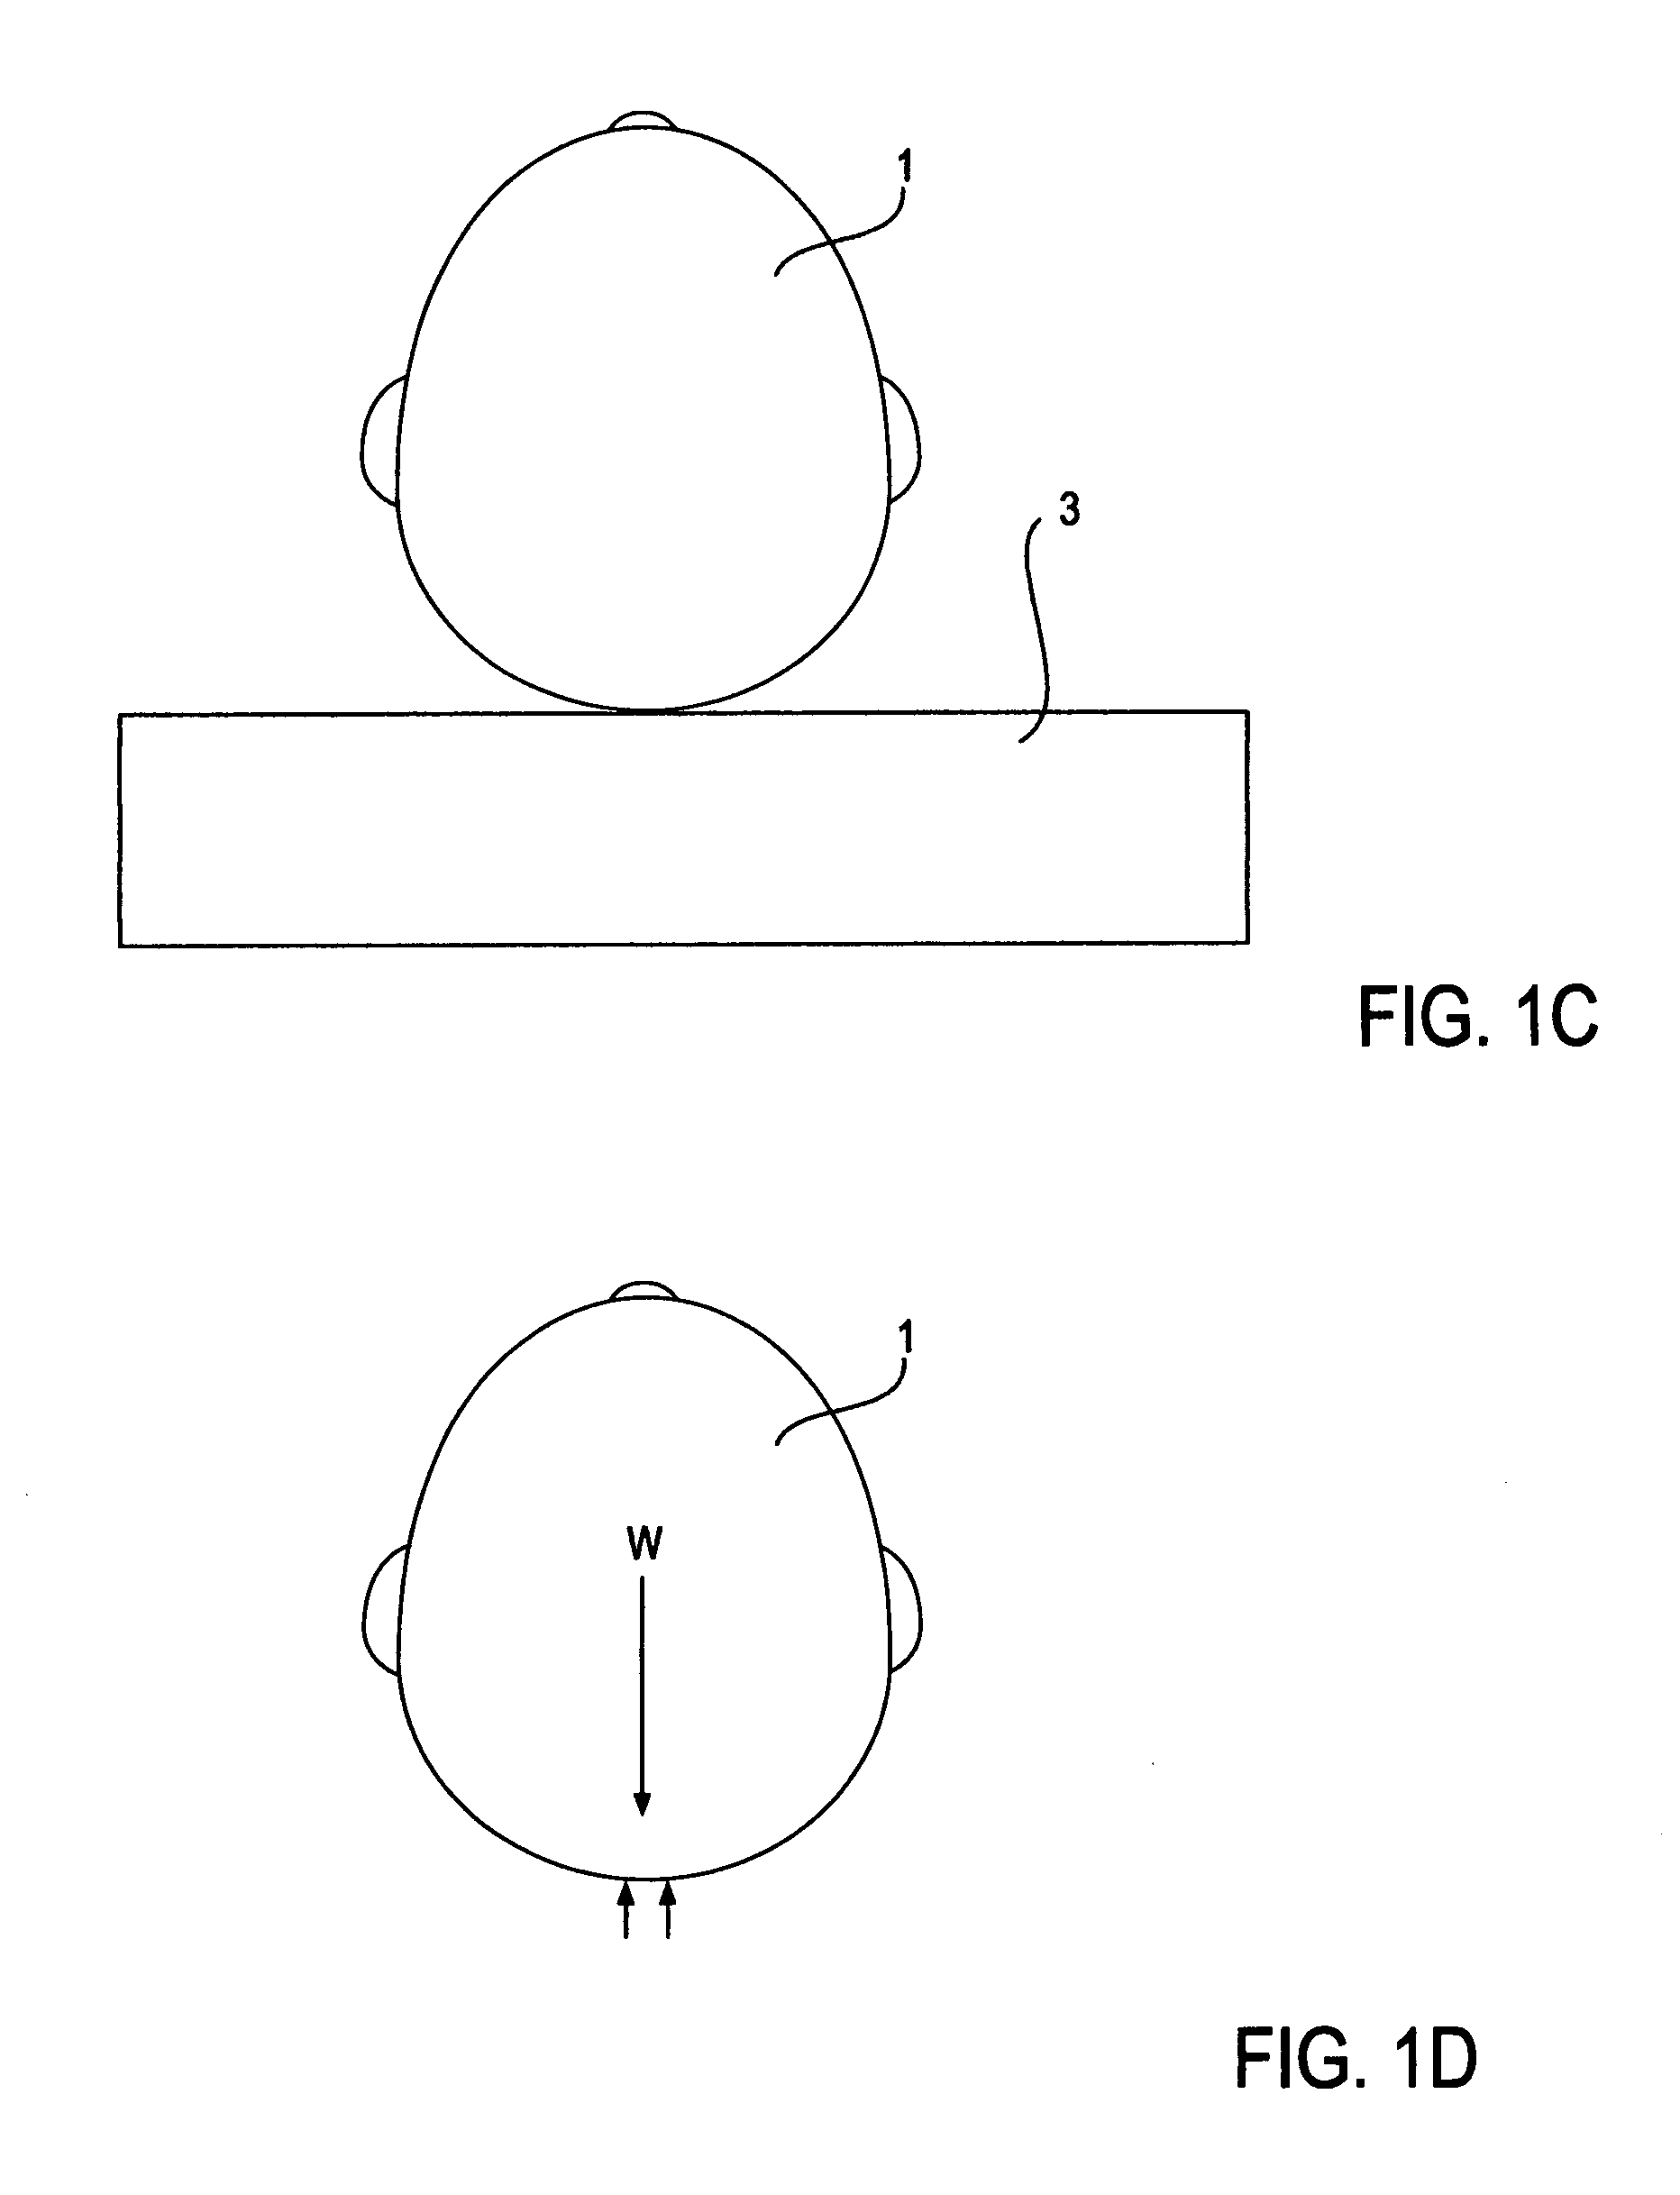 Personal support device that provides uniform distribution of pressure on a body portion